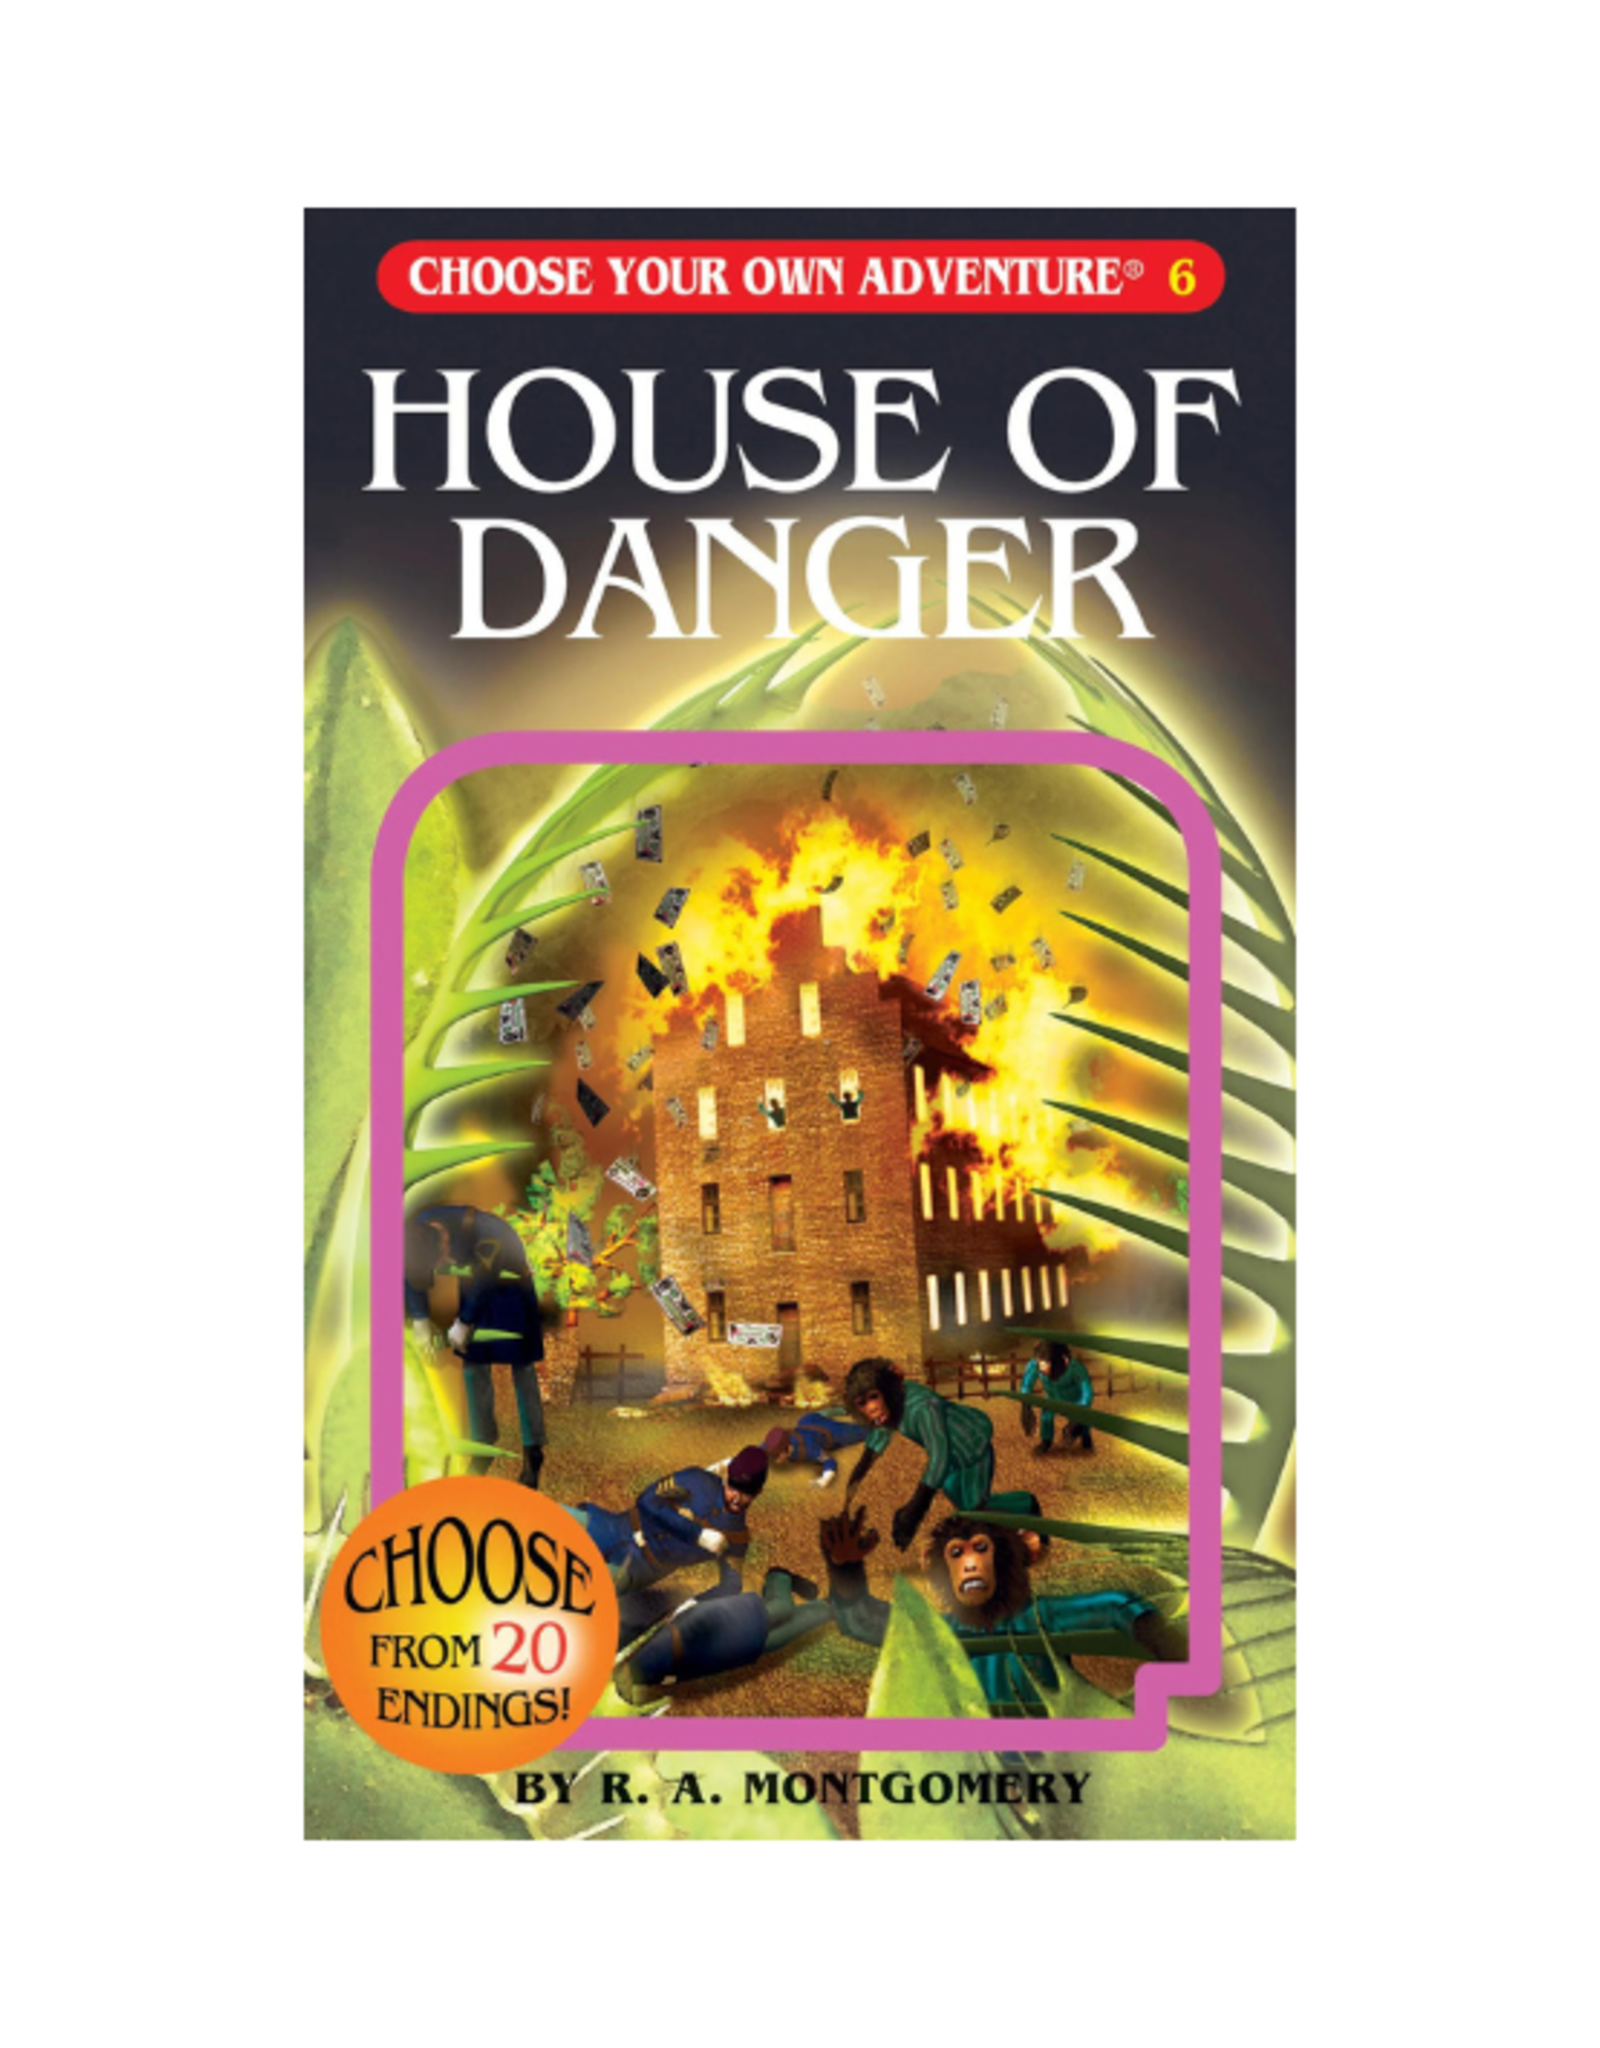 Choose Your Own Adventure Book - Choose Your Own Adventure - House of Danger